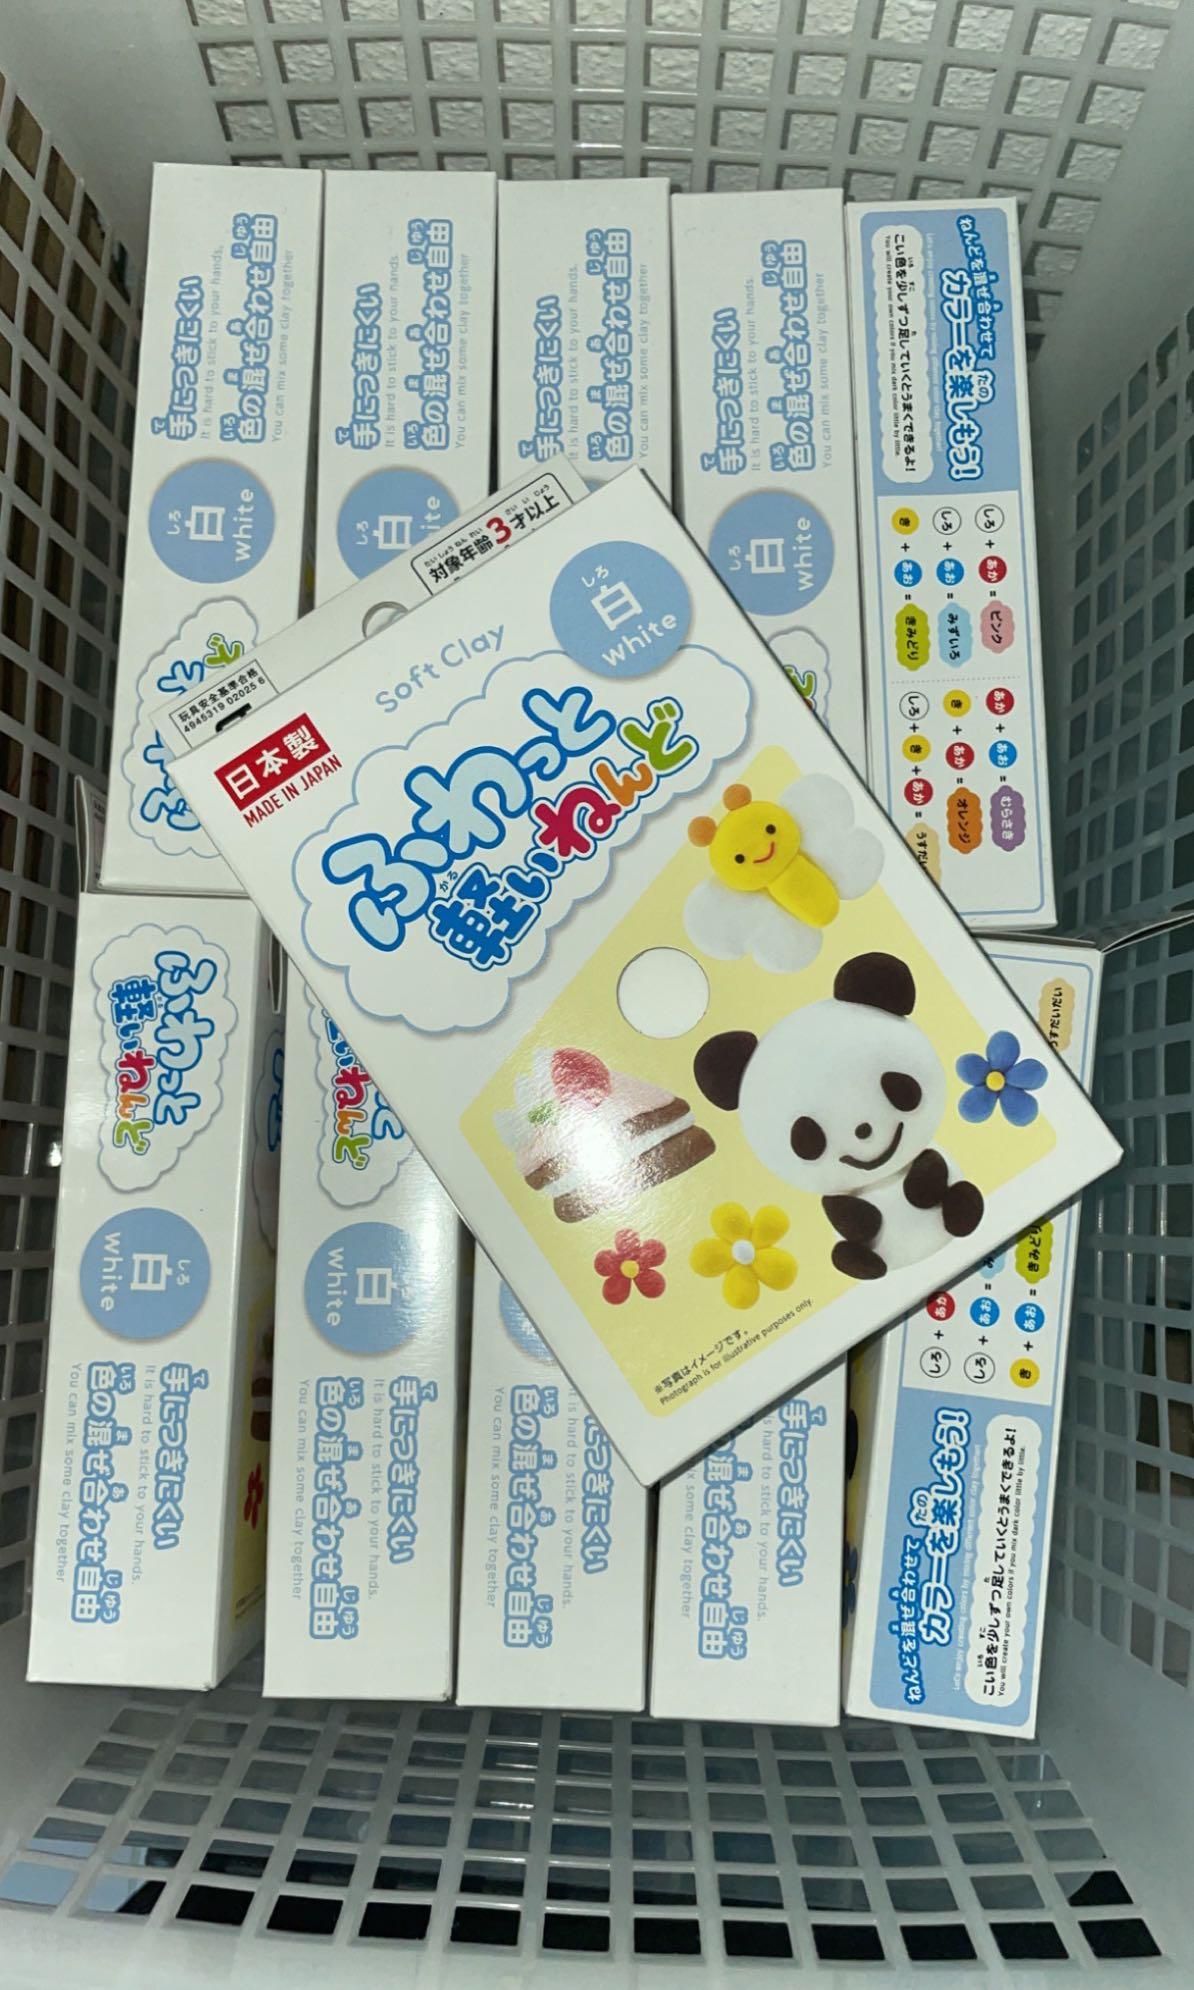 ONE Soft Daiso Clay, Pick ONE From All 8 Colors, Perfect for